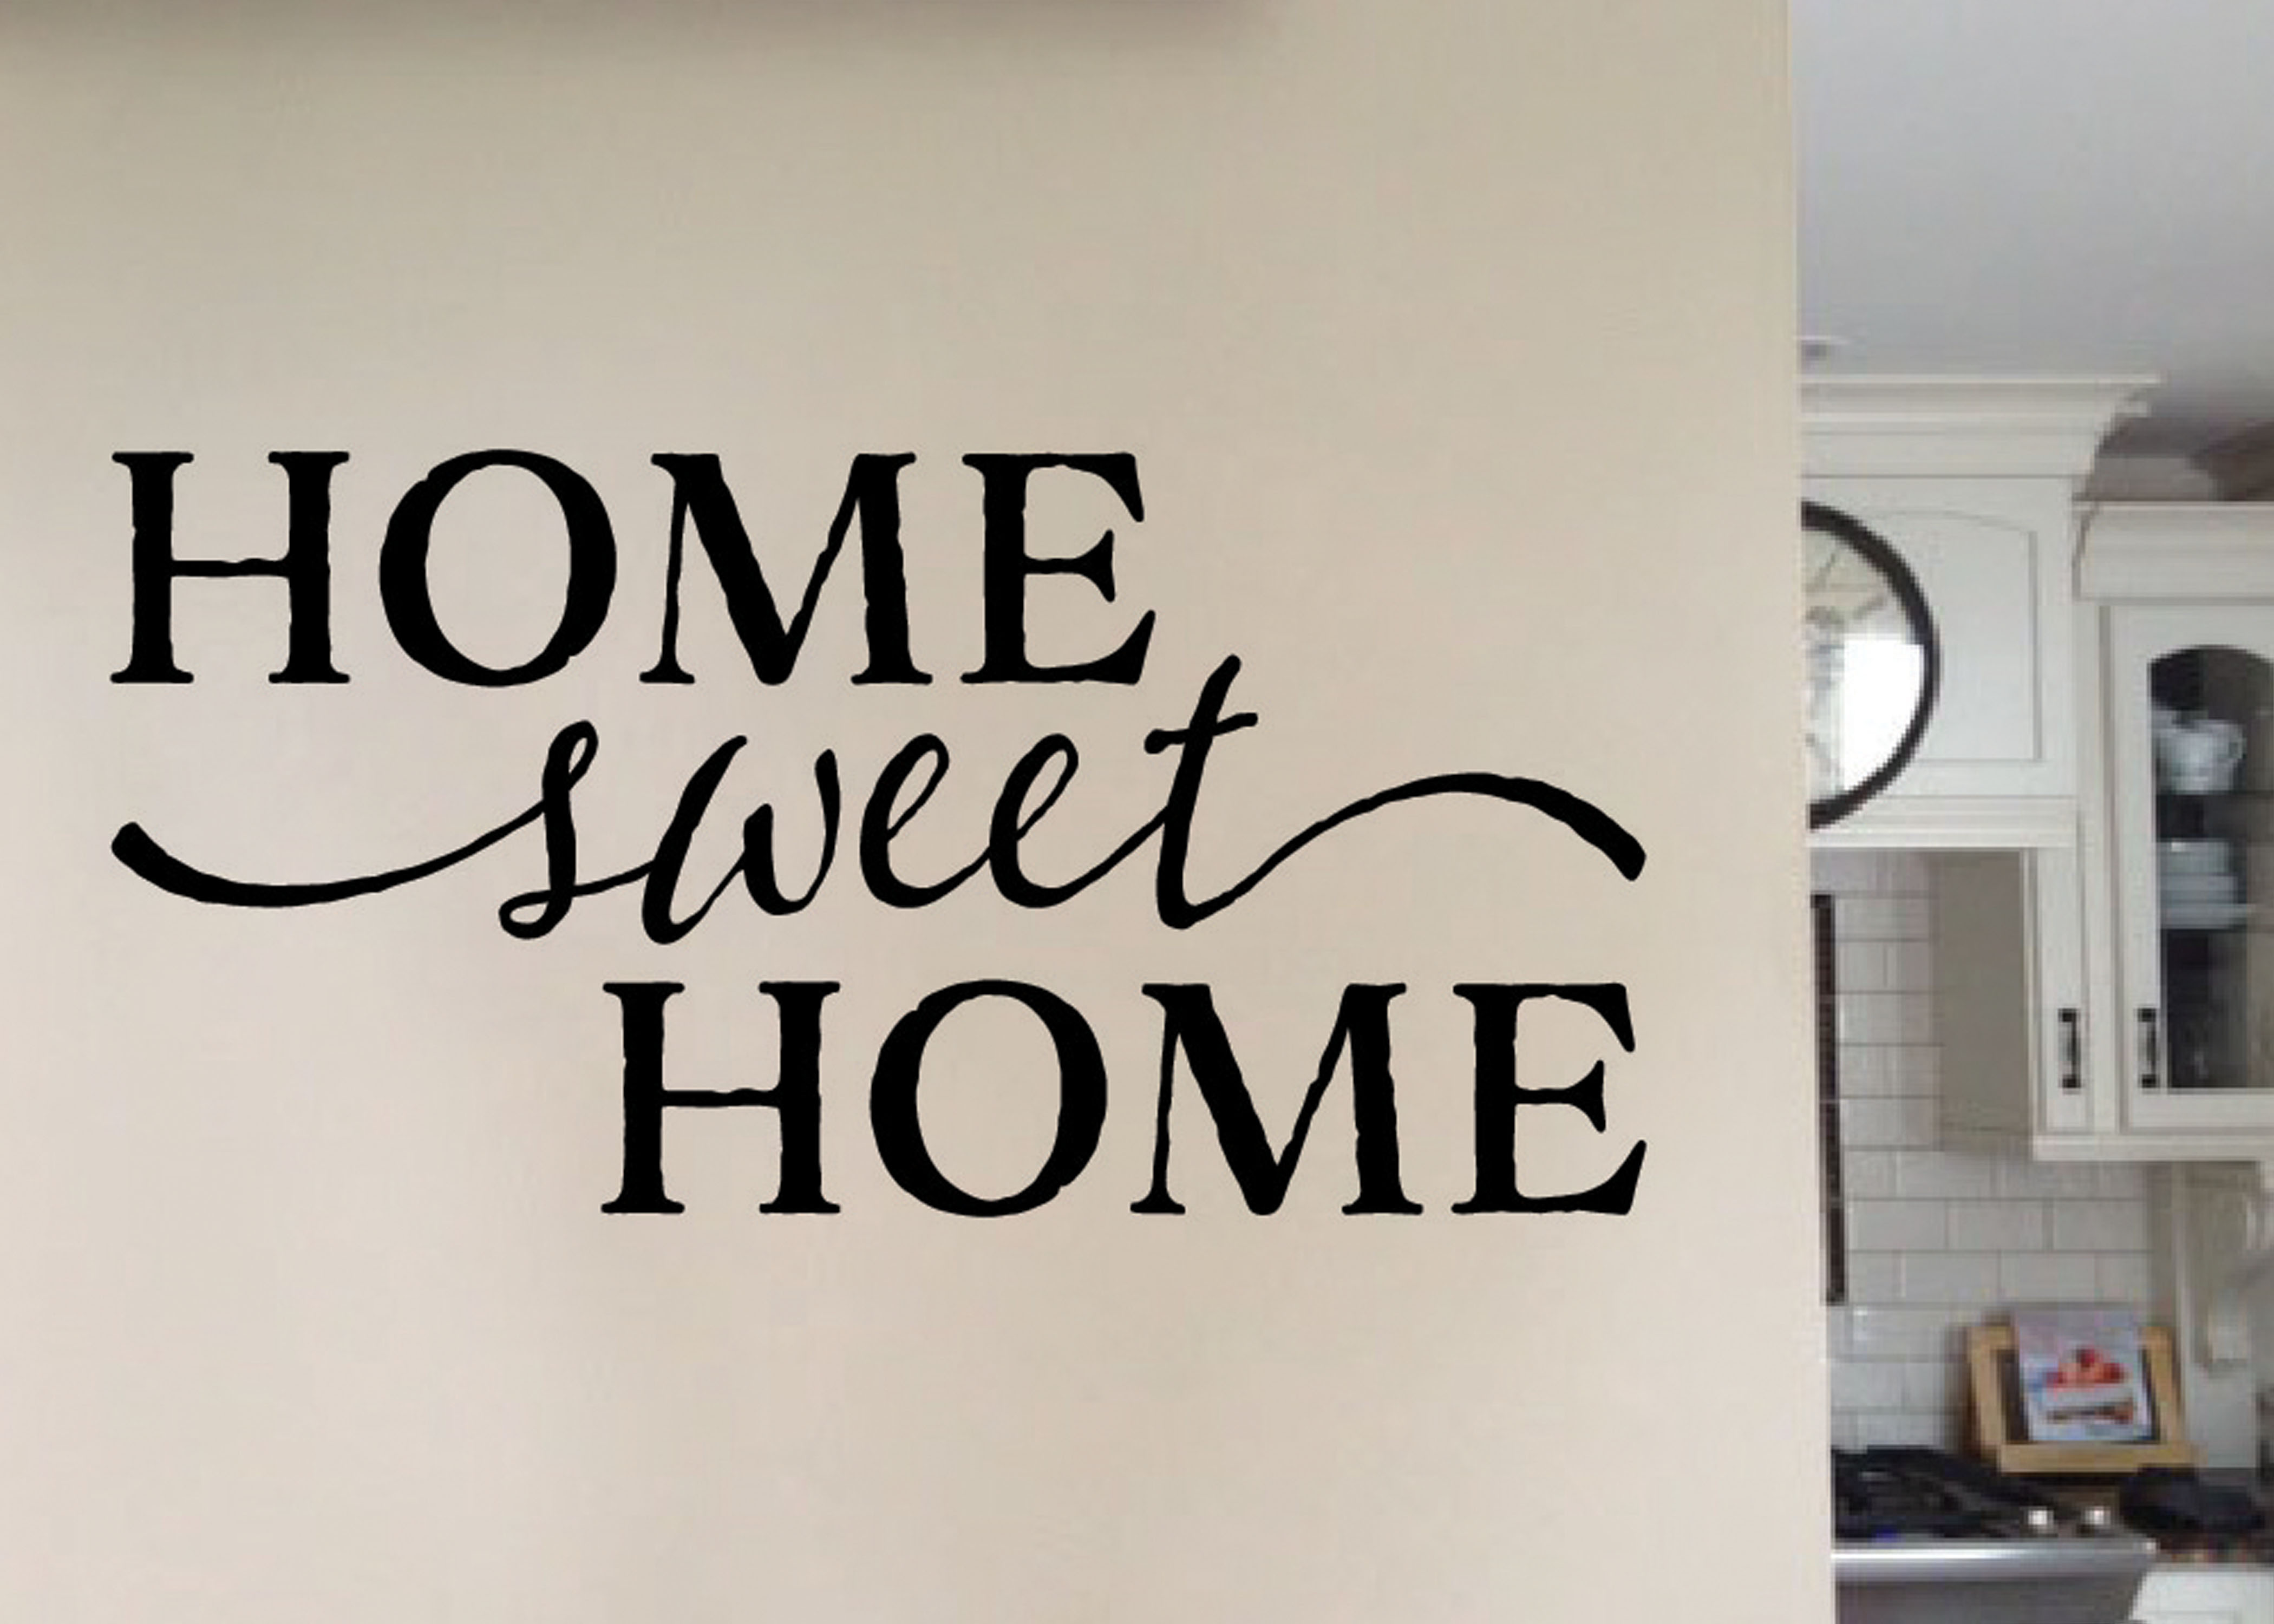 HOME SWEET HOME Farmhouse Rustic Wall Decal Quote Words Decor Sticker DIY